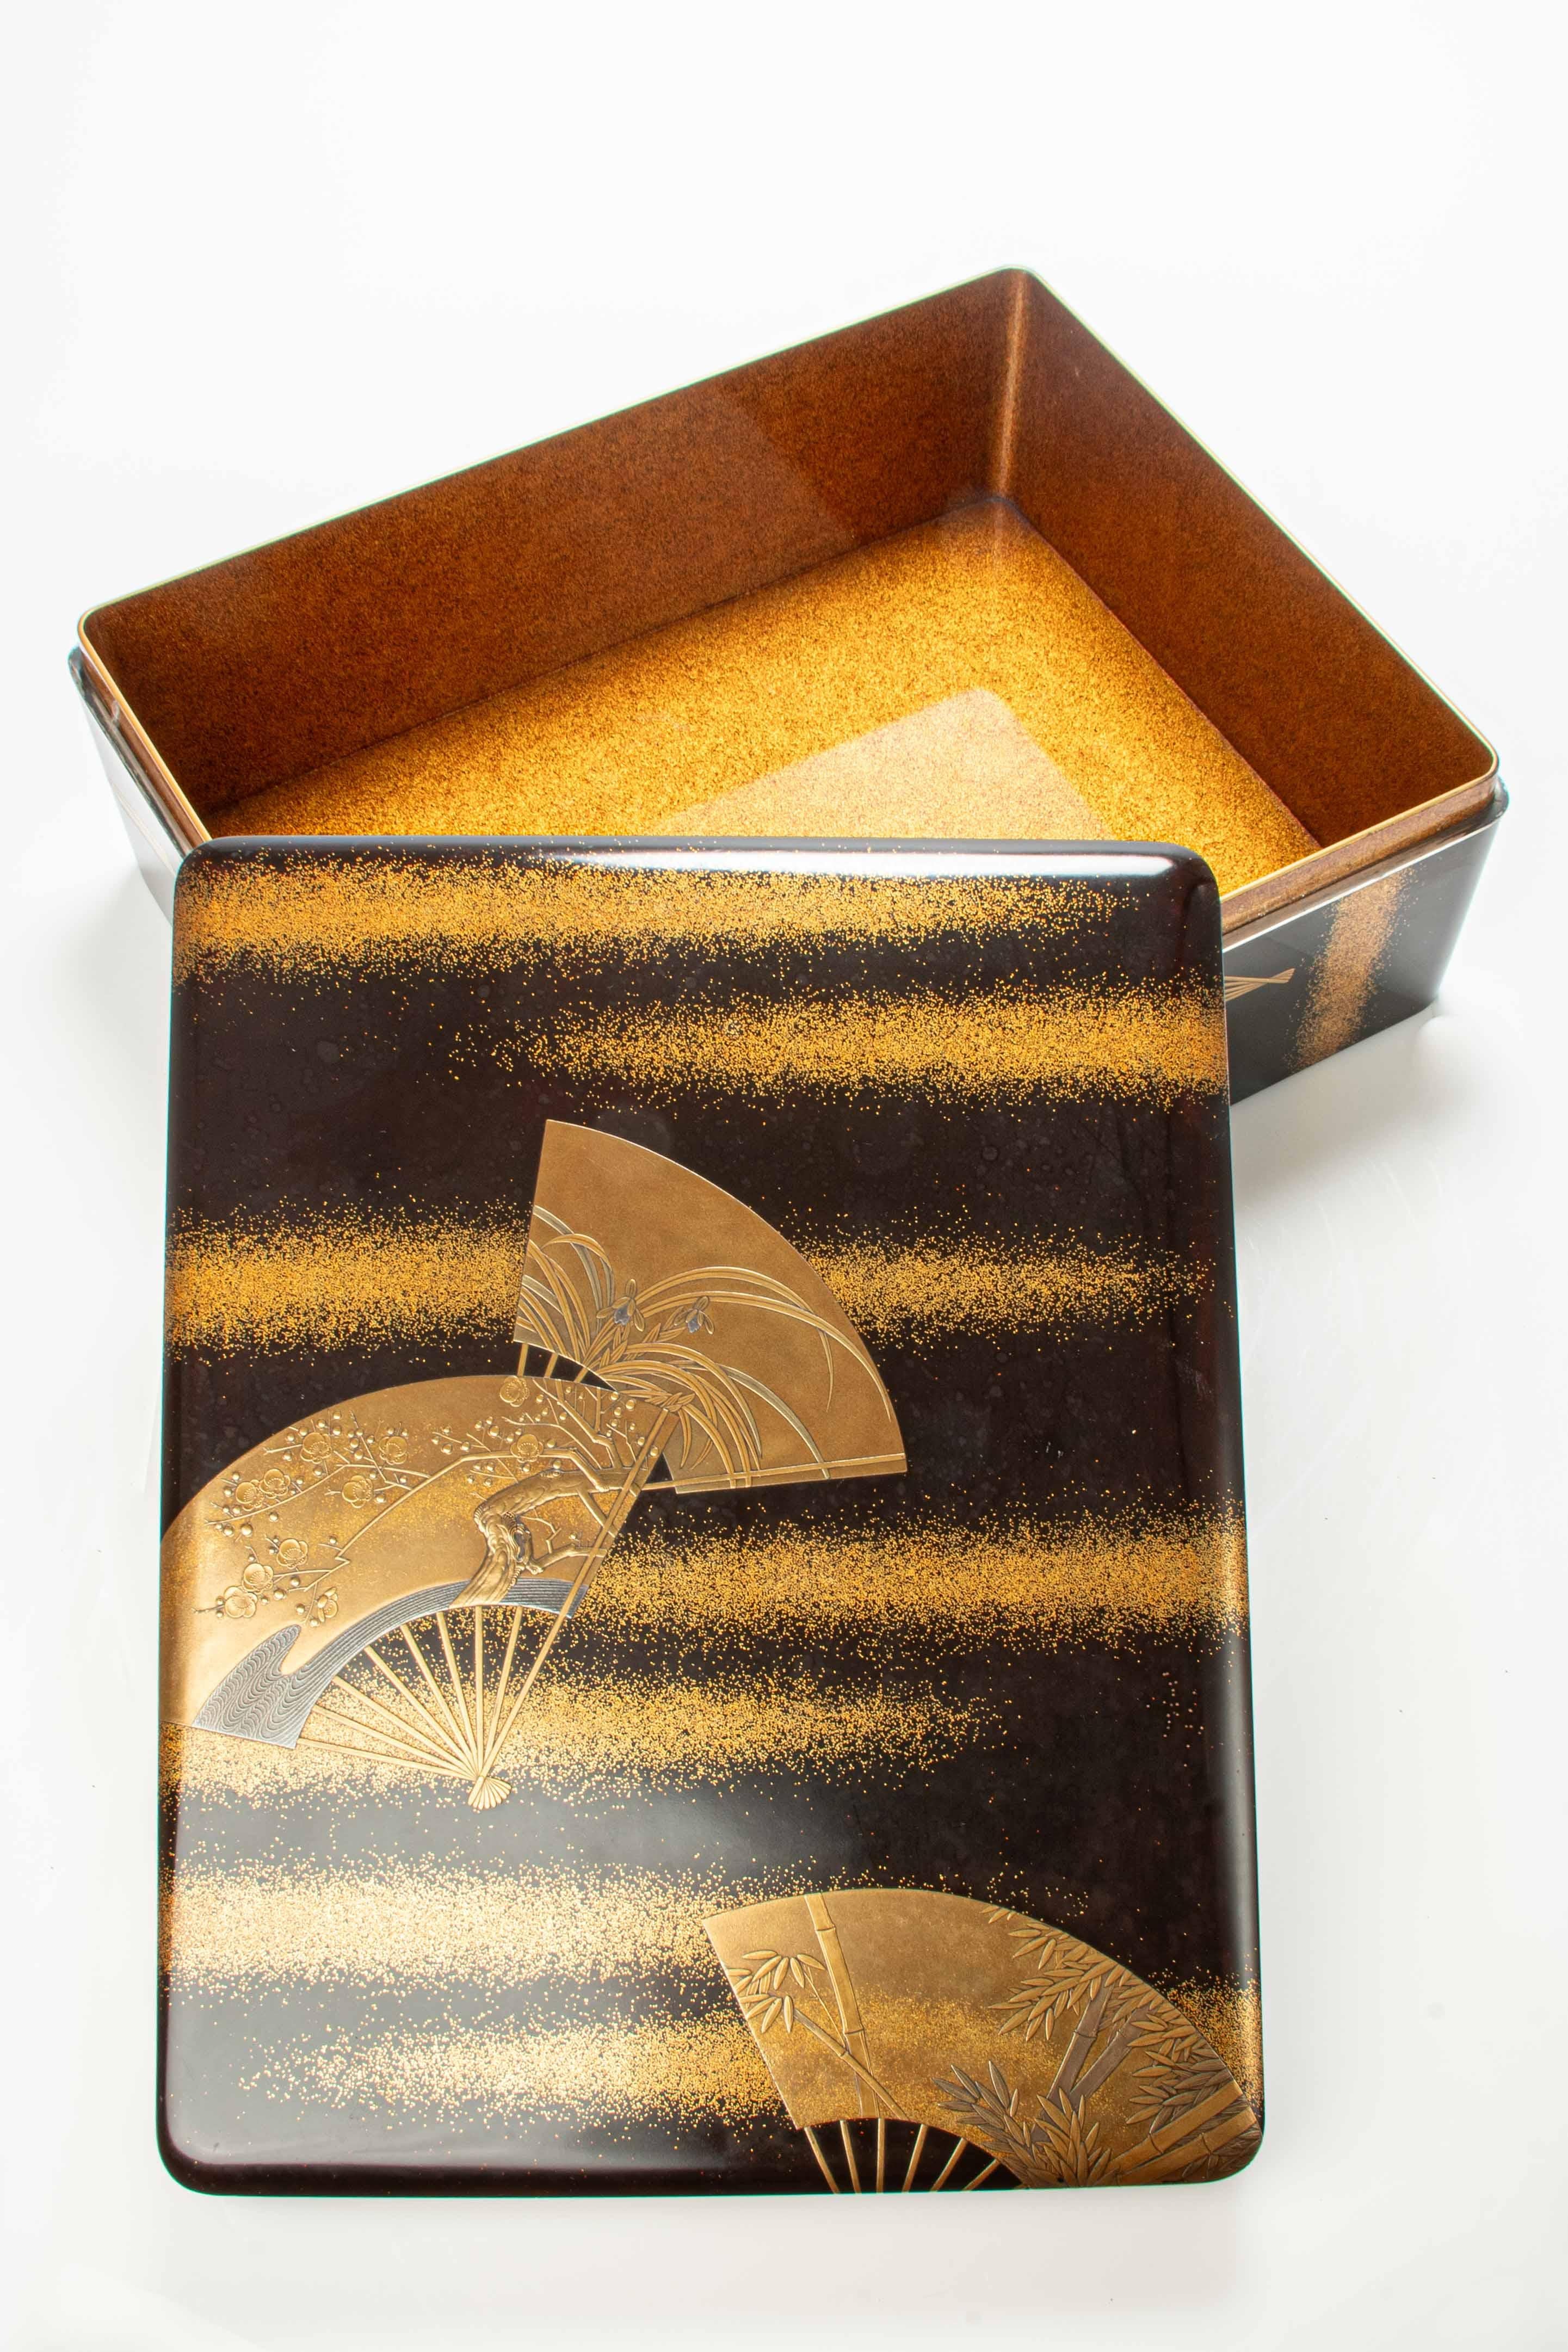 Lacquer box decorated with gold and silver details using the traditional Japanese technique of takamaki-e and hiramaki-e depicting a motif of three superimposed fans on a nashiji lacquer background.

Each fan is decorated with different flowers,